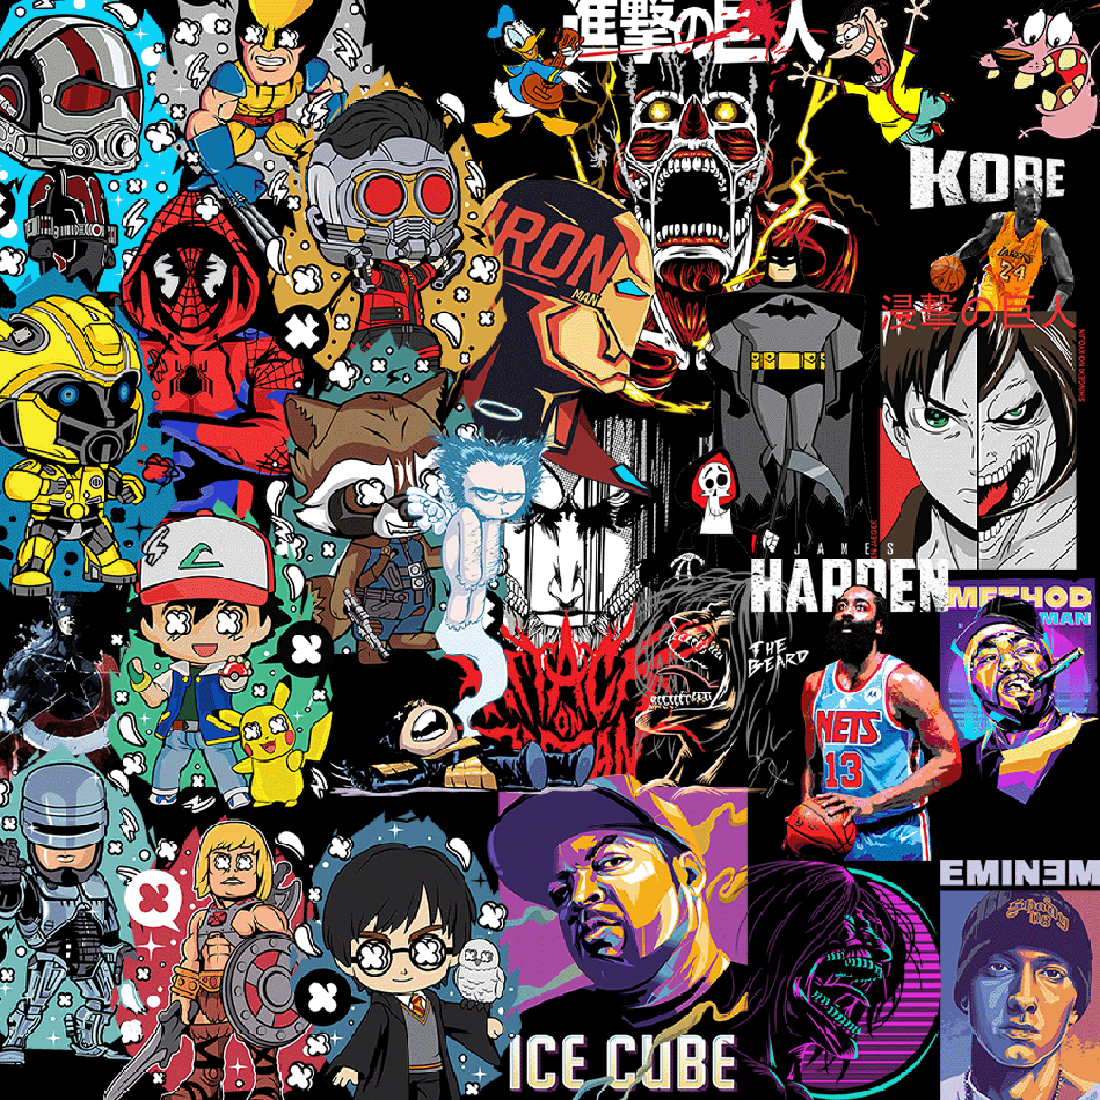 Ultimate Fusion: A Master Bundle of Anime, Rappers, Cartoons, Superheroes, Supervillains, and More! cover image.